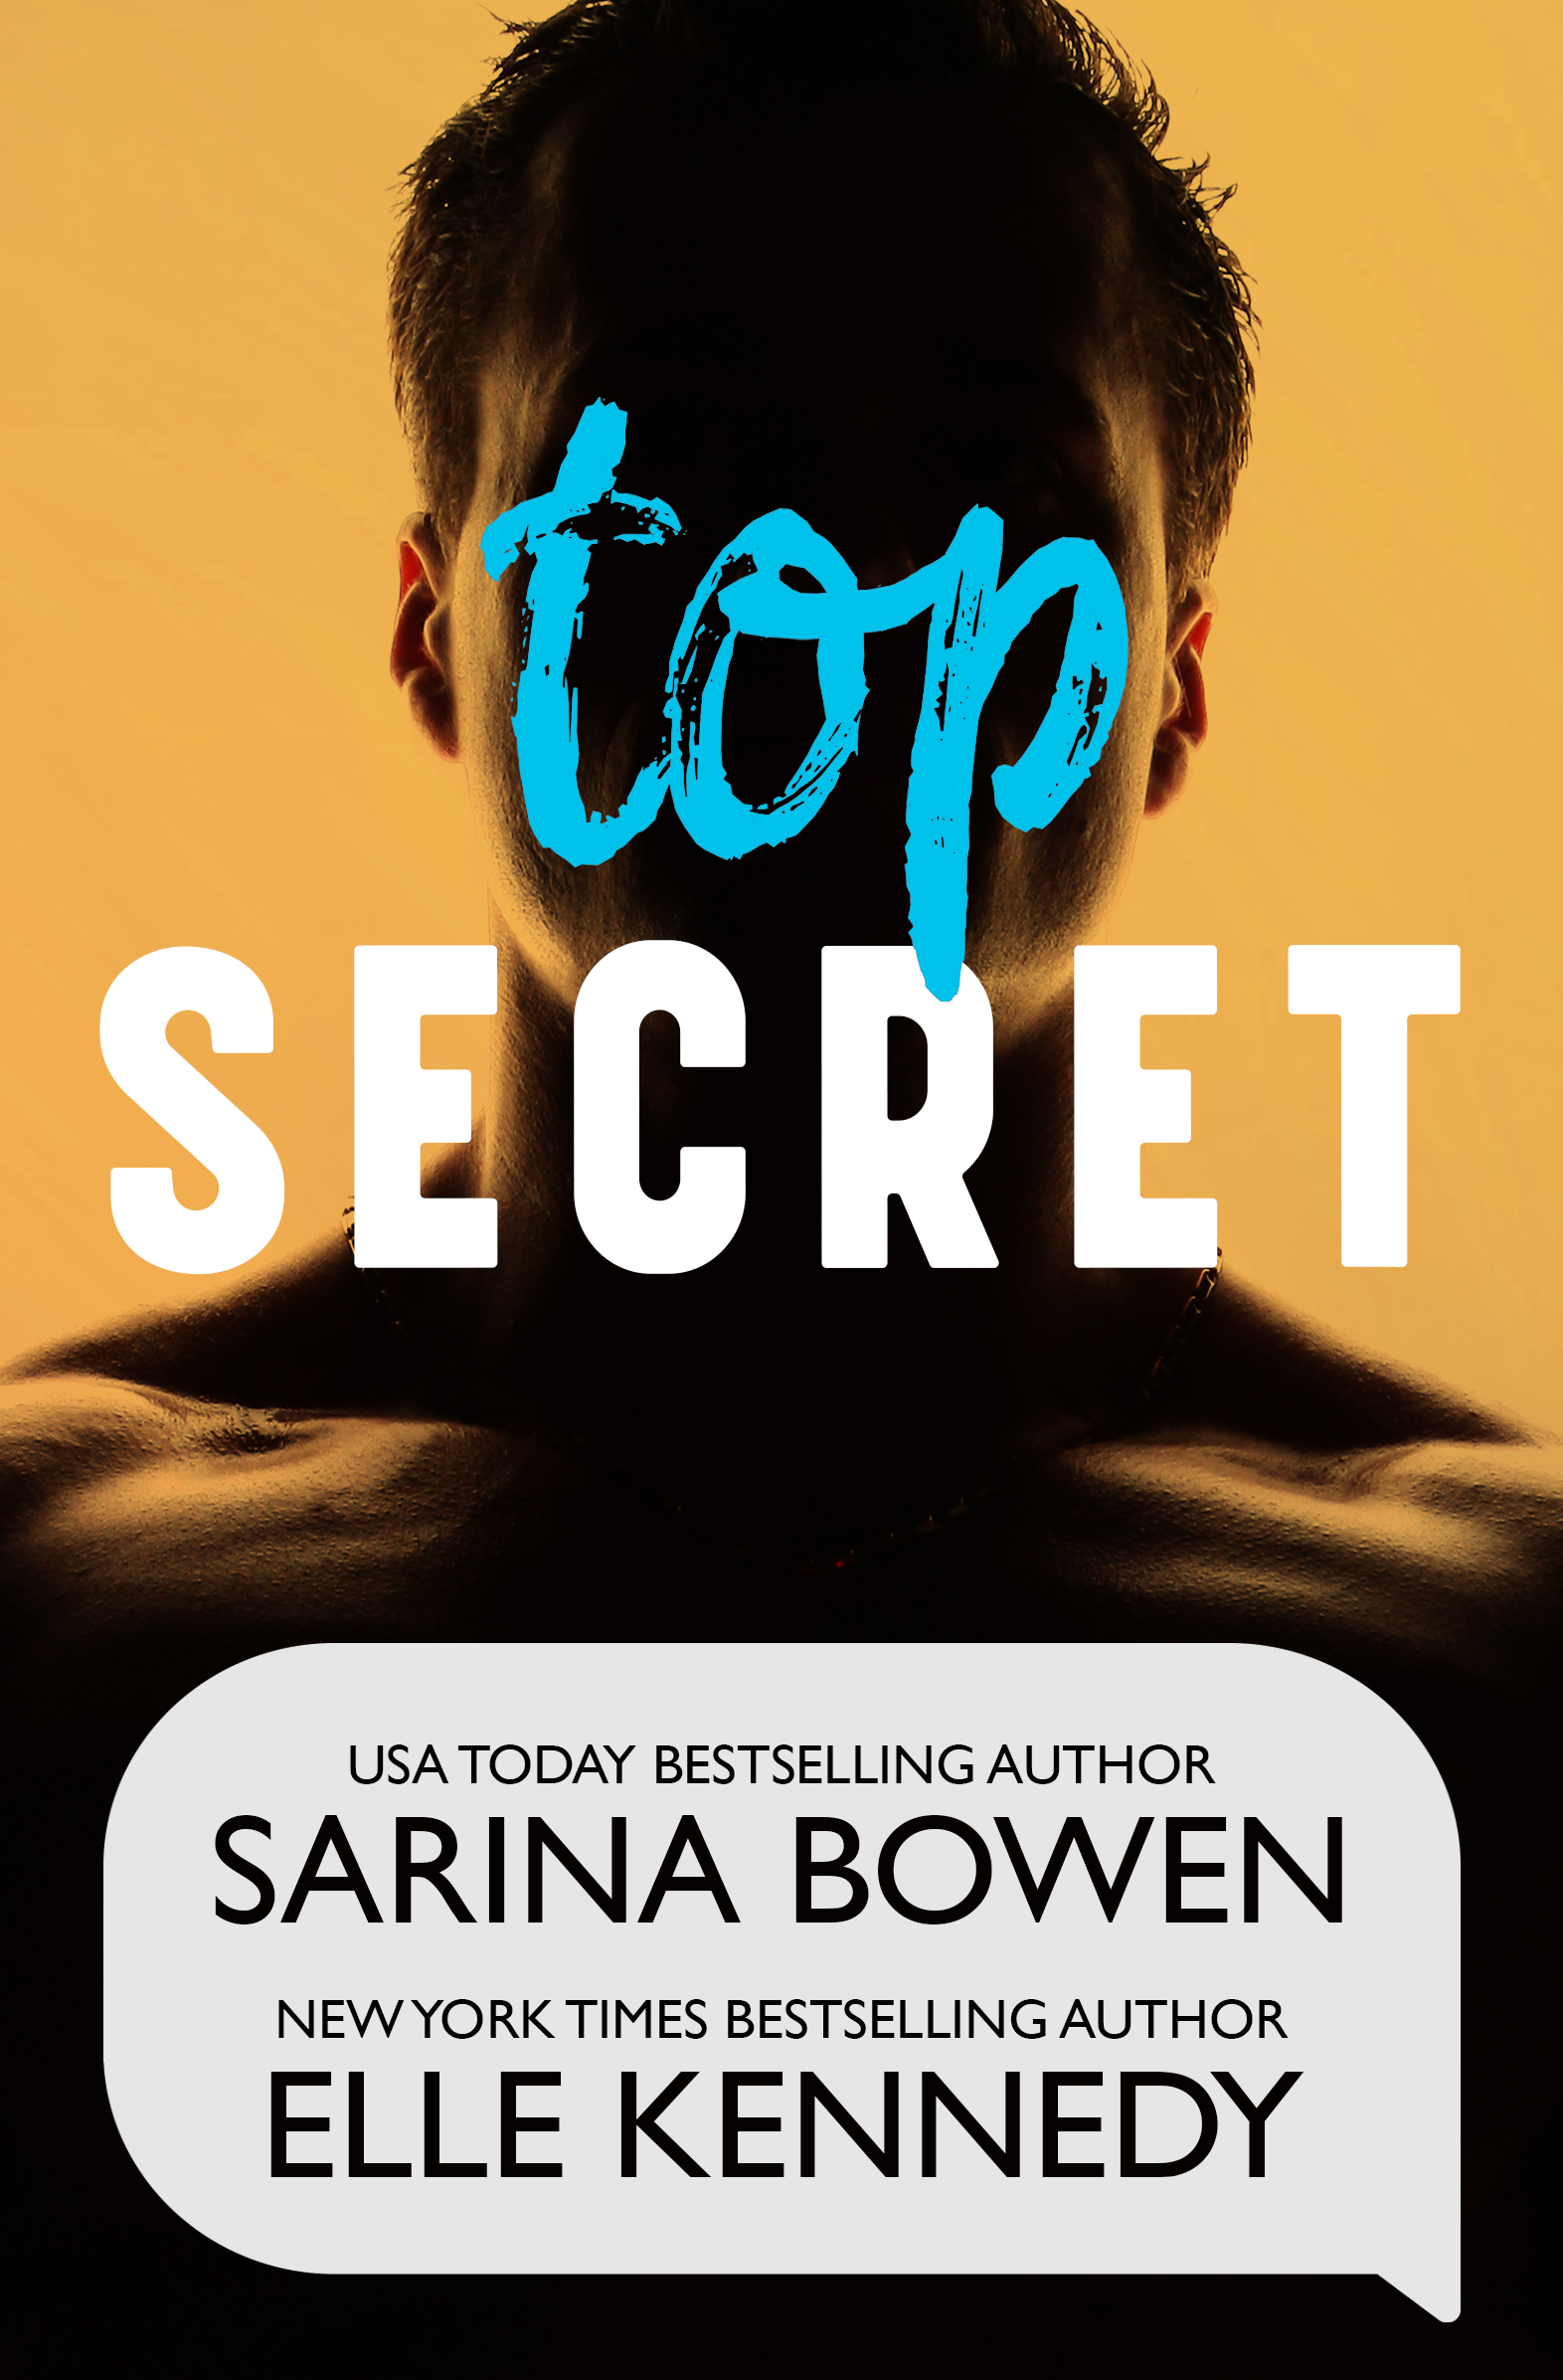 LOVED….Top Secret by Sarina Bowen and Elle Kennedy 🦞 🌈 💖